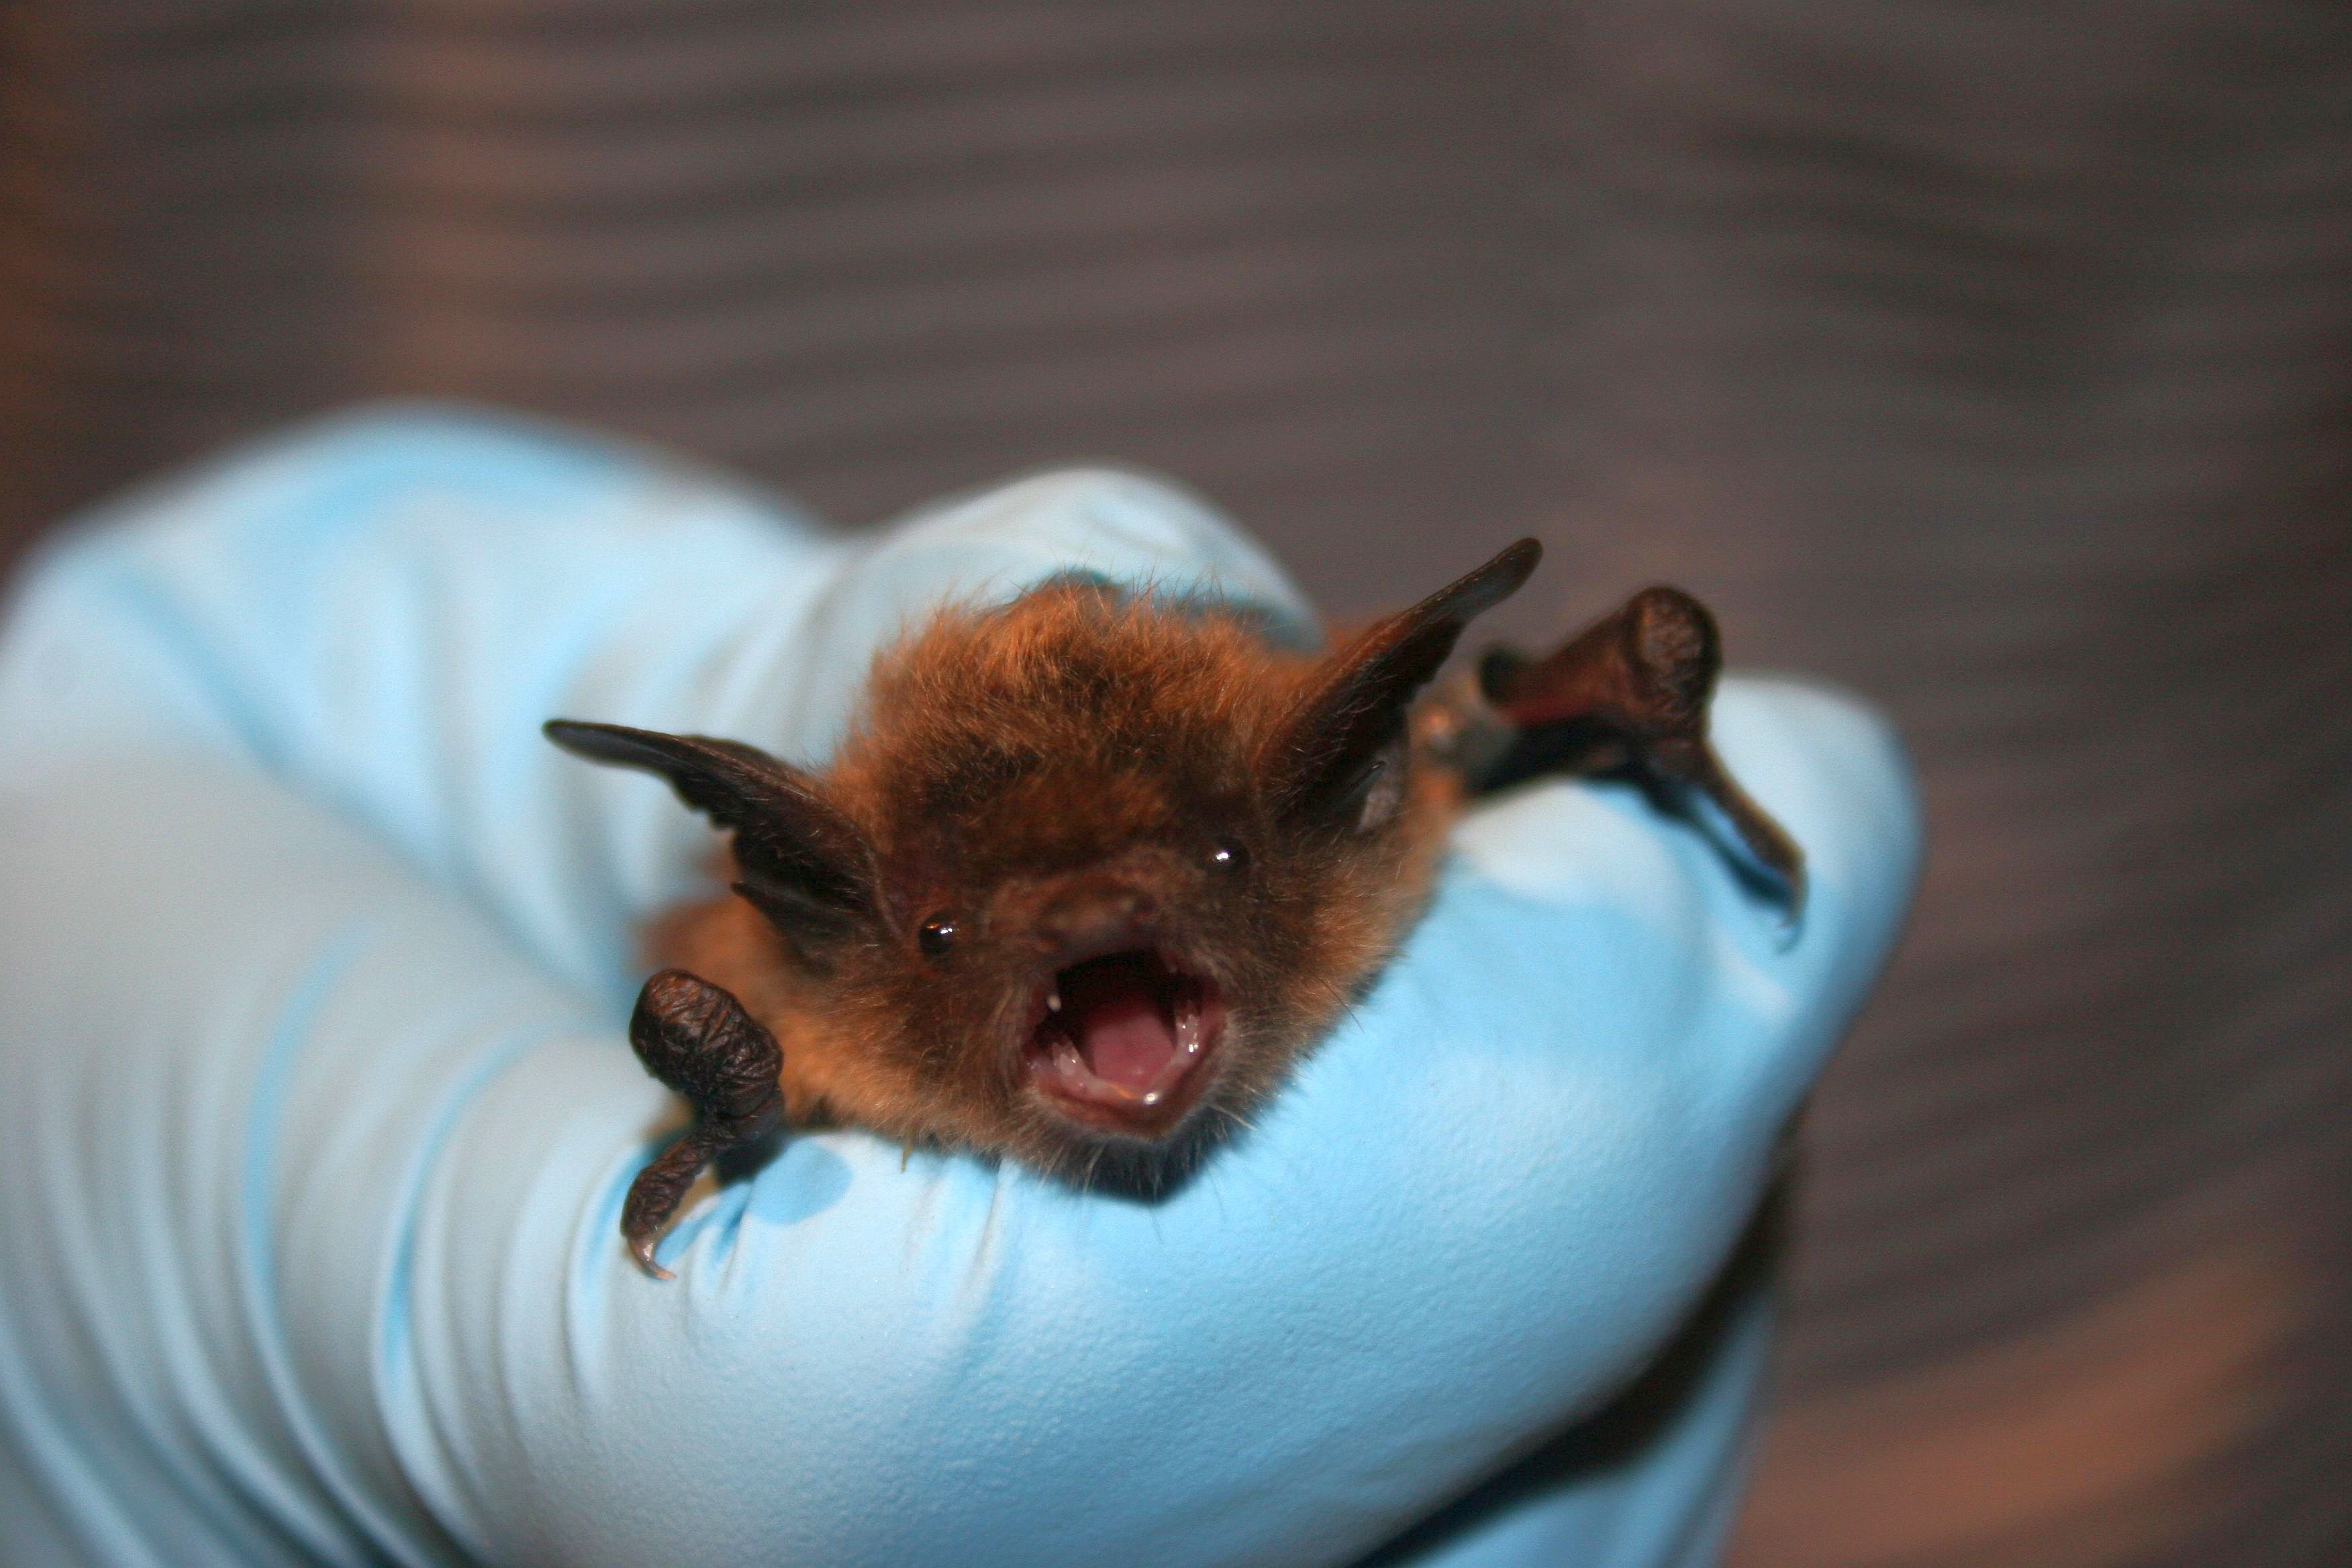 A small brown bat with an excited look on its face and its mouth wide mouth in the gloved hand a of biologist